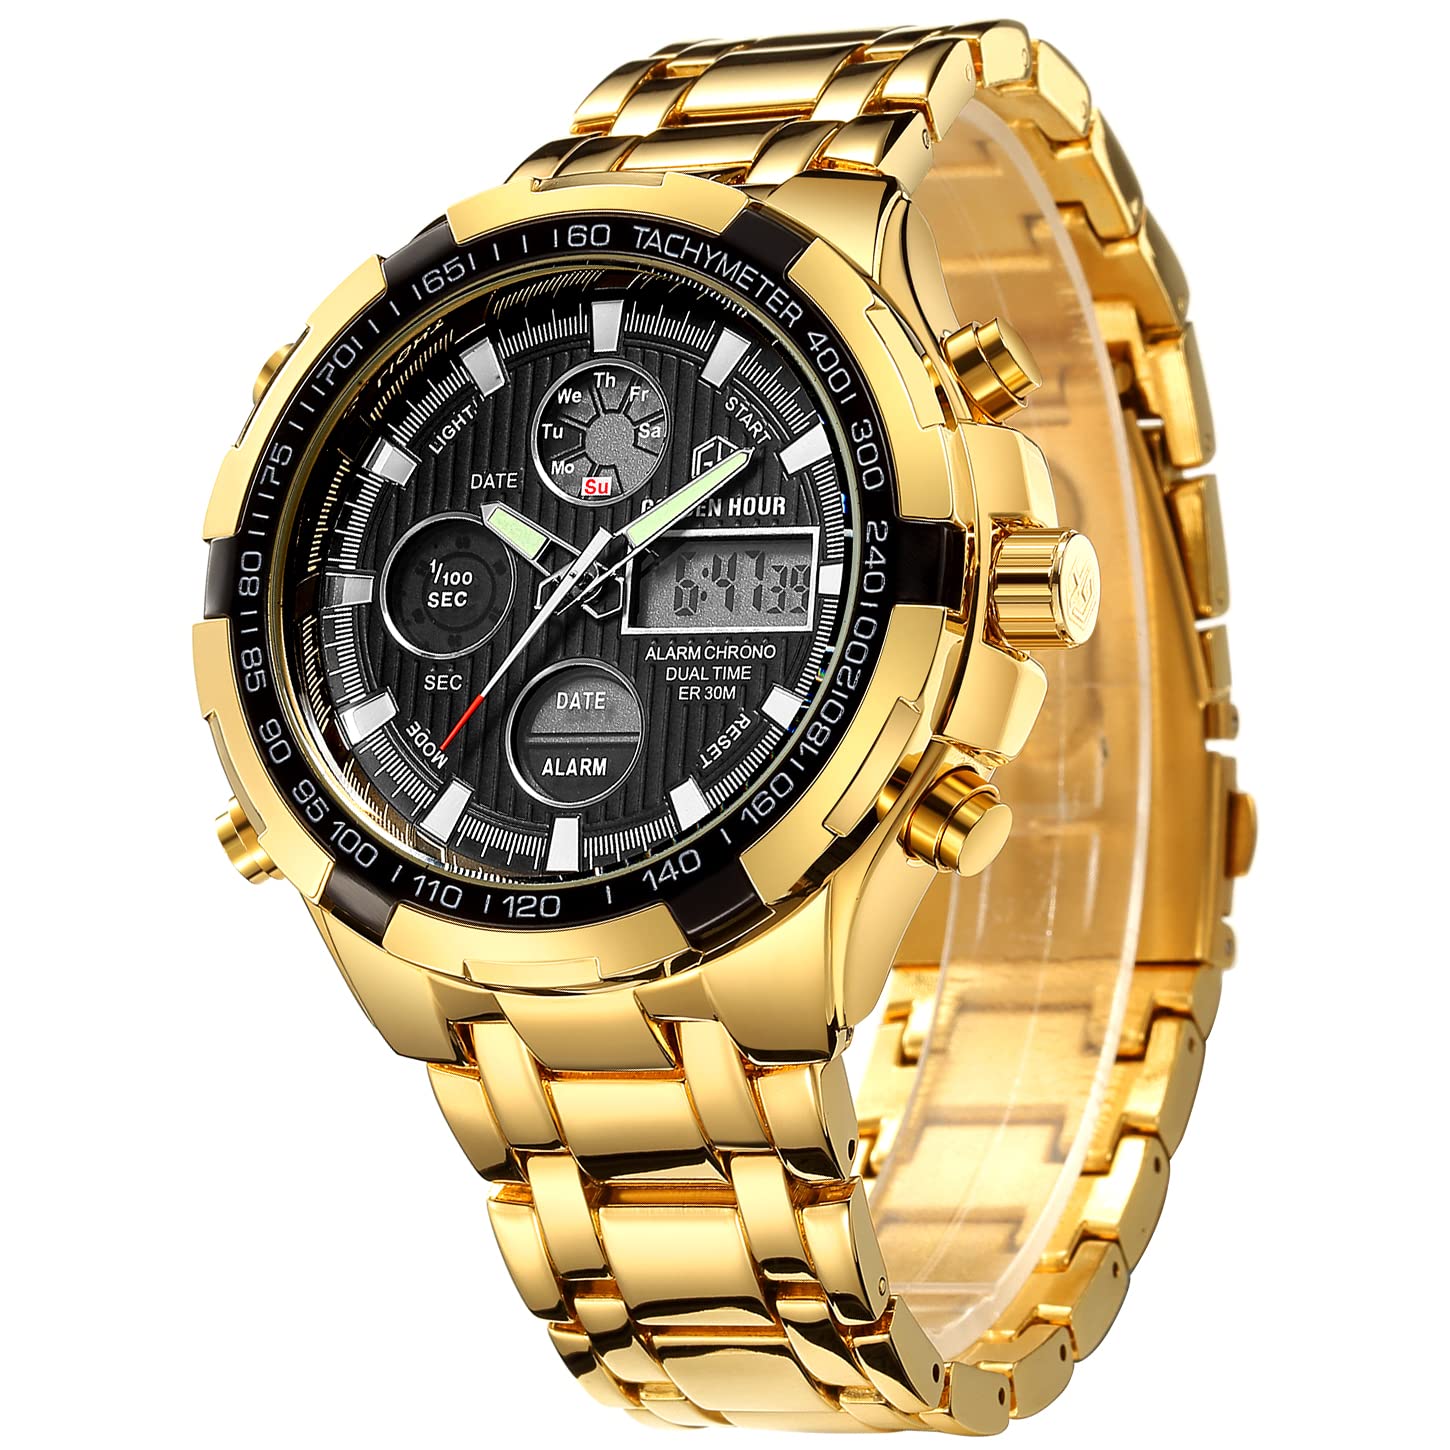 GOLDEN HOUR Luxury Stainless Steel Analog Digital Watches for Men Male Outdoor Sport Waterproof Large Big Size Heavy Wristwatch 